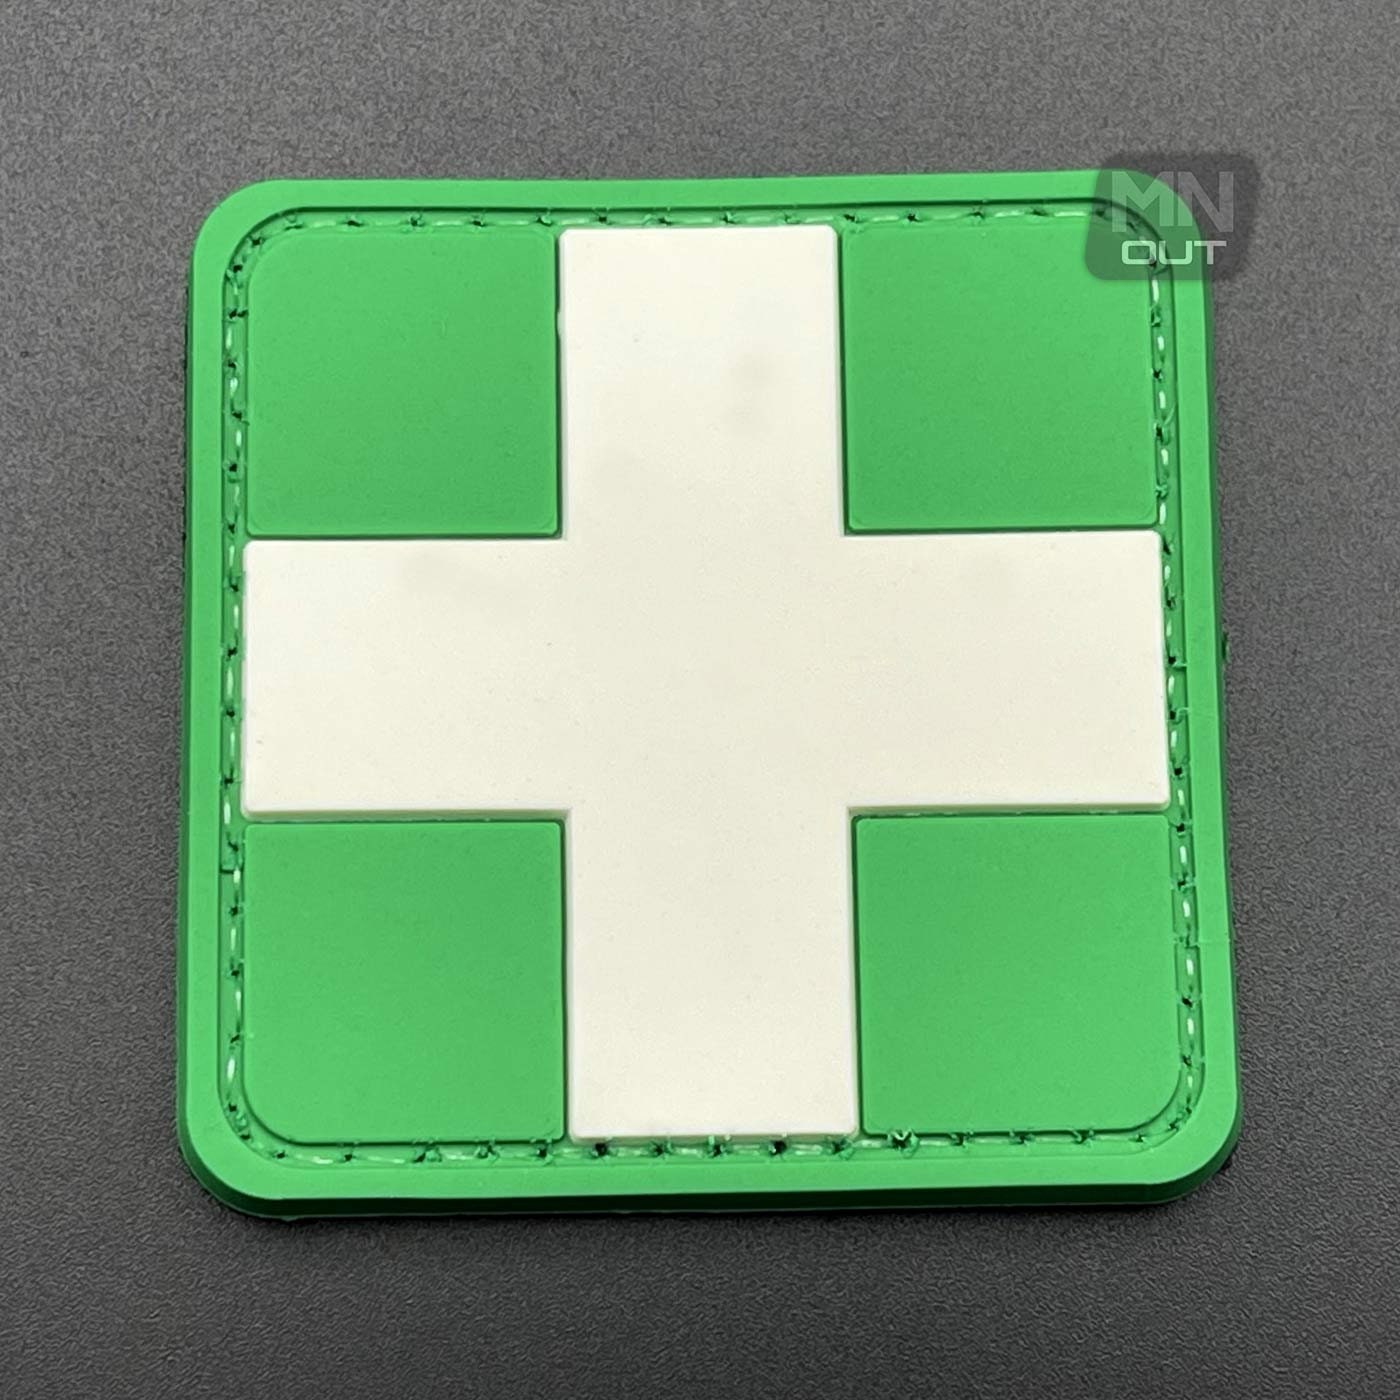 AED Defibrillator Name Tag EMT Medical Patch Heart Text Bag First